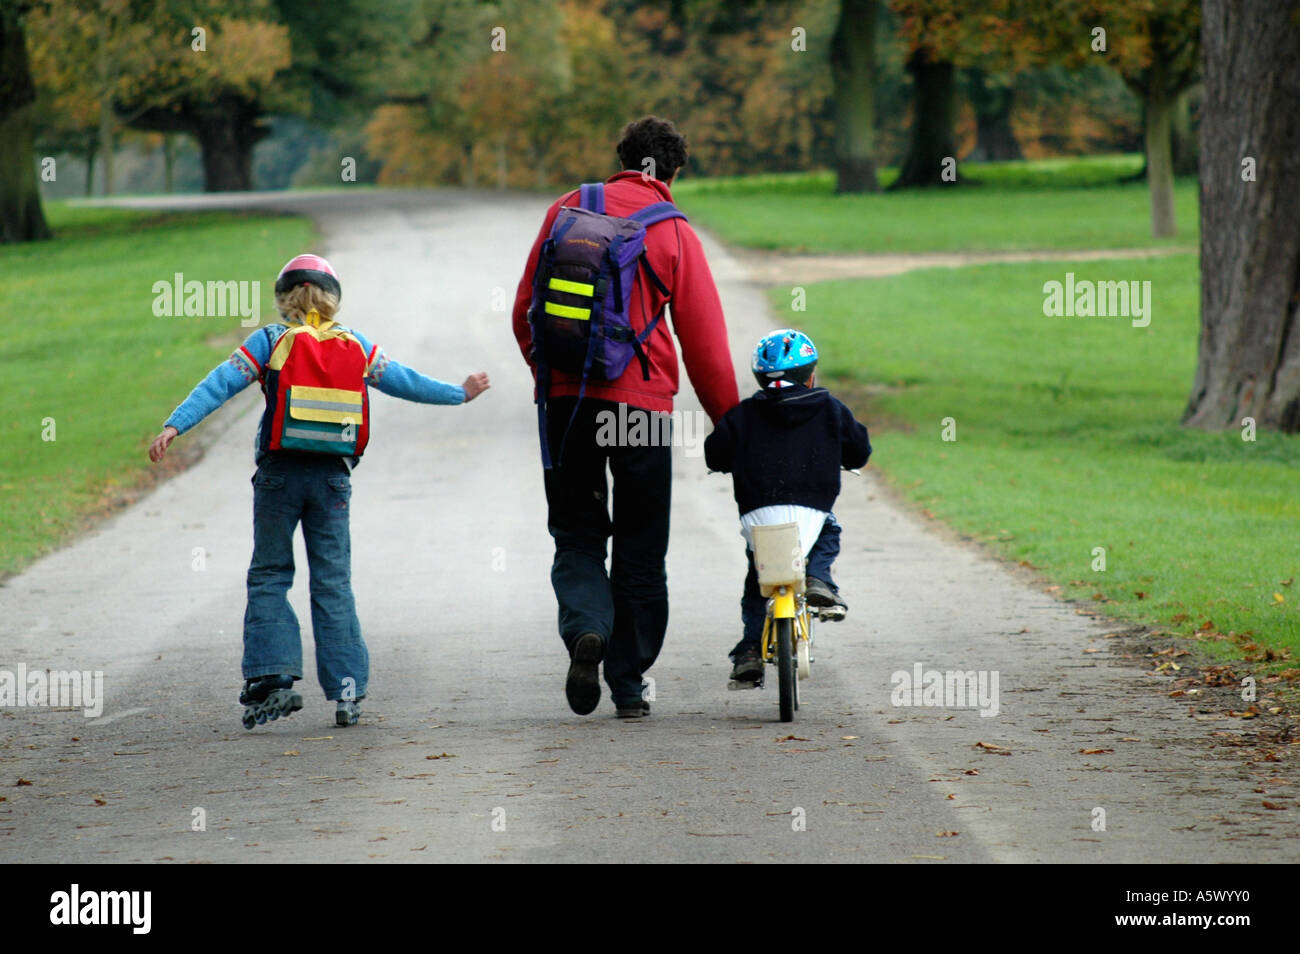 Father in the park with children, one child cycling and one child roller blading Stock Photo